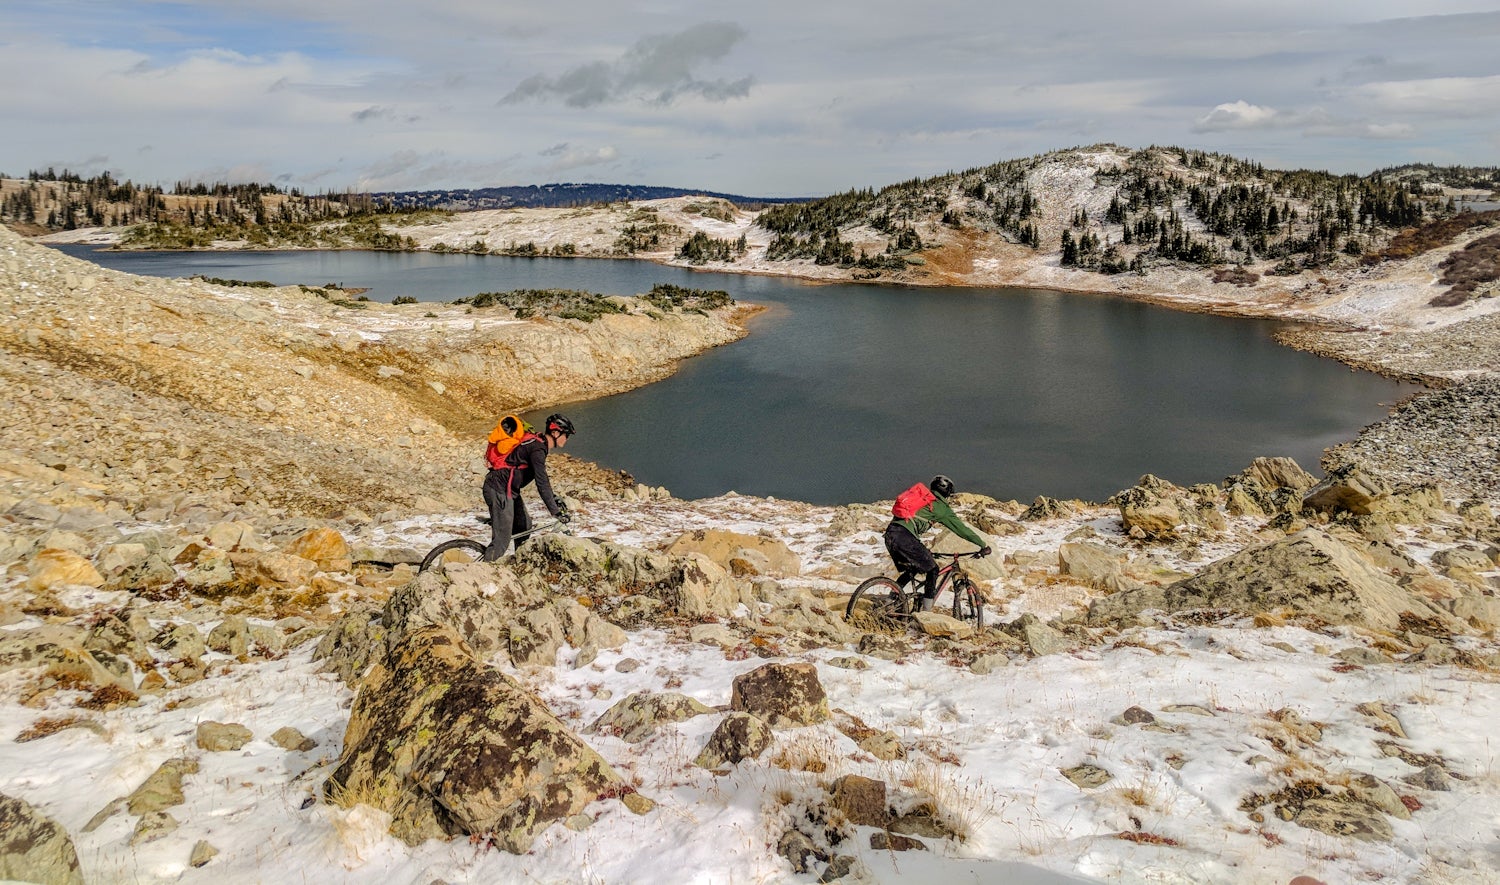 Two mountain bikers manuever through rugged landscape and snow patches beside an alpine lake.